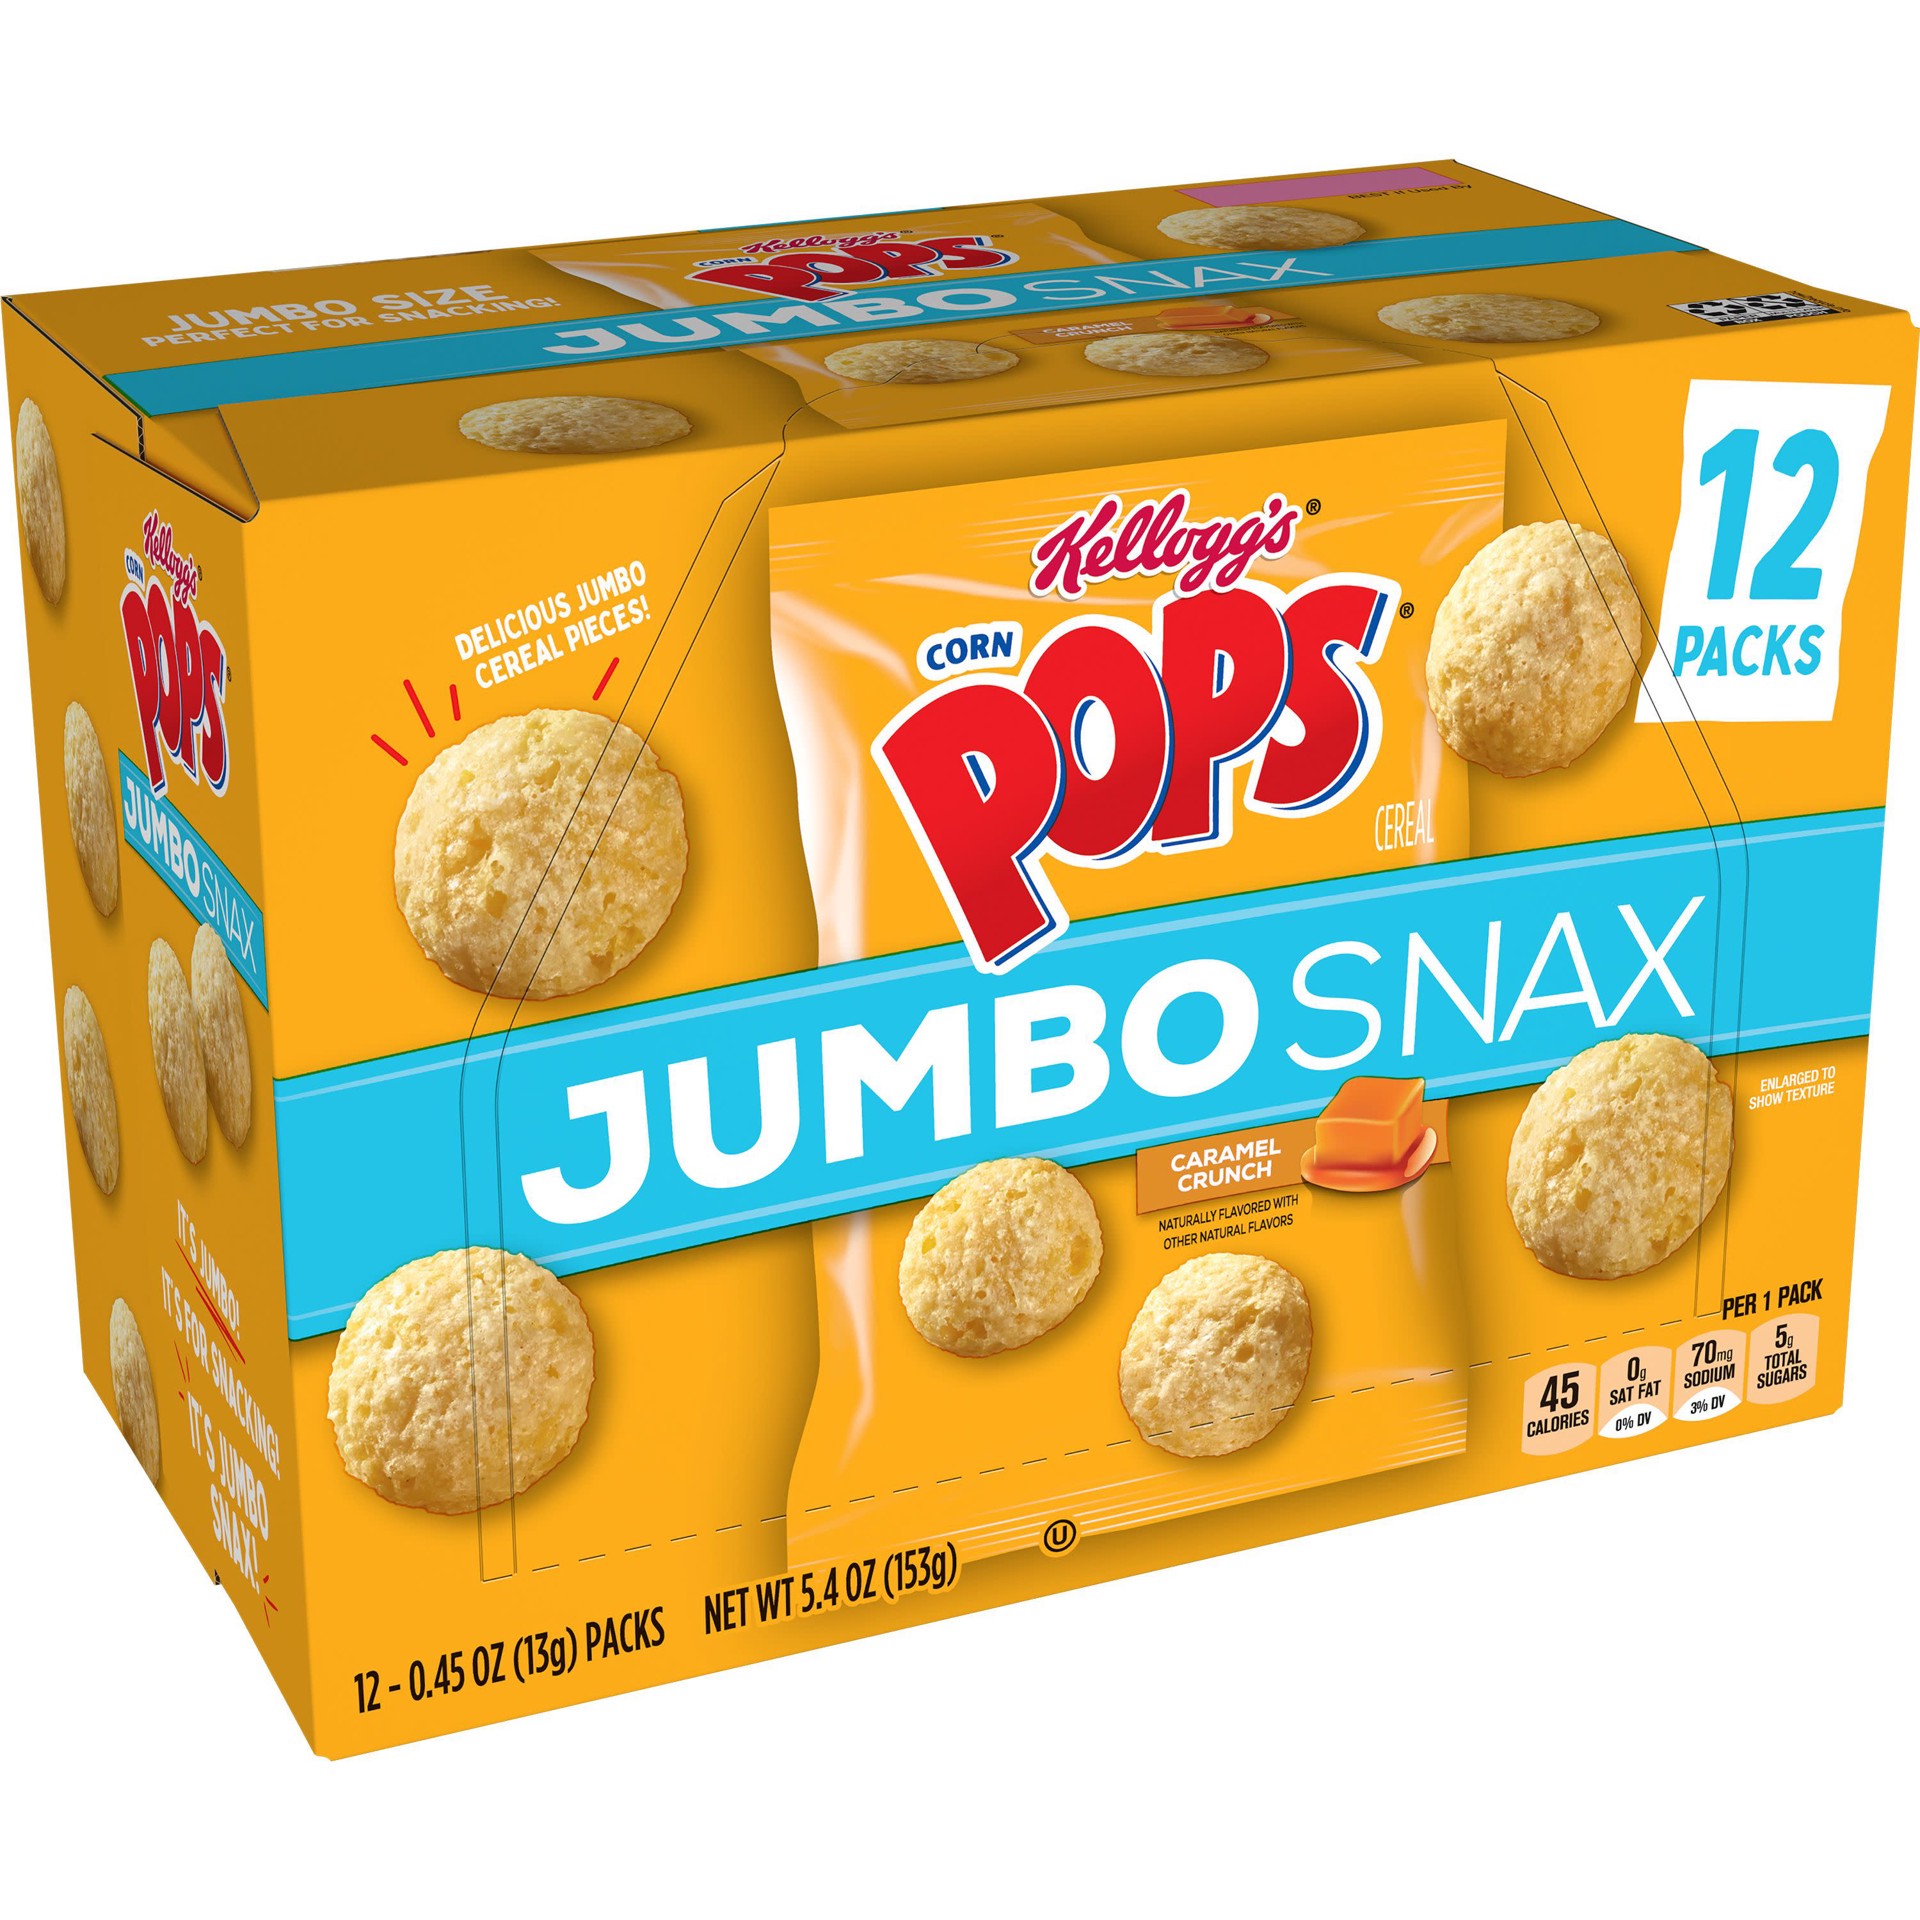 slide 1 of 5, Corn Pops Kellogg's Corn Pops Jumbo Snax, Cereal, Caramel Crunch, Perfect for Anytime Snacking, 5.4oz Box, 12 Count, 5.4 oz